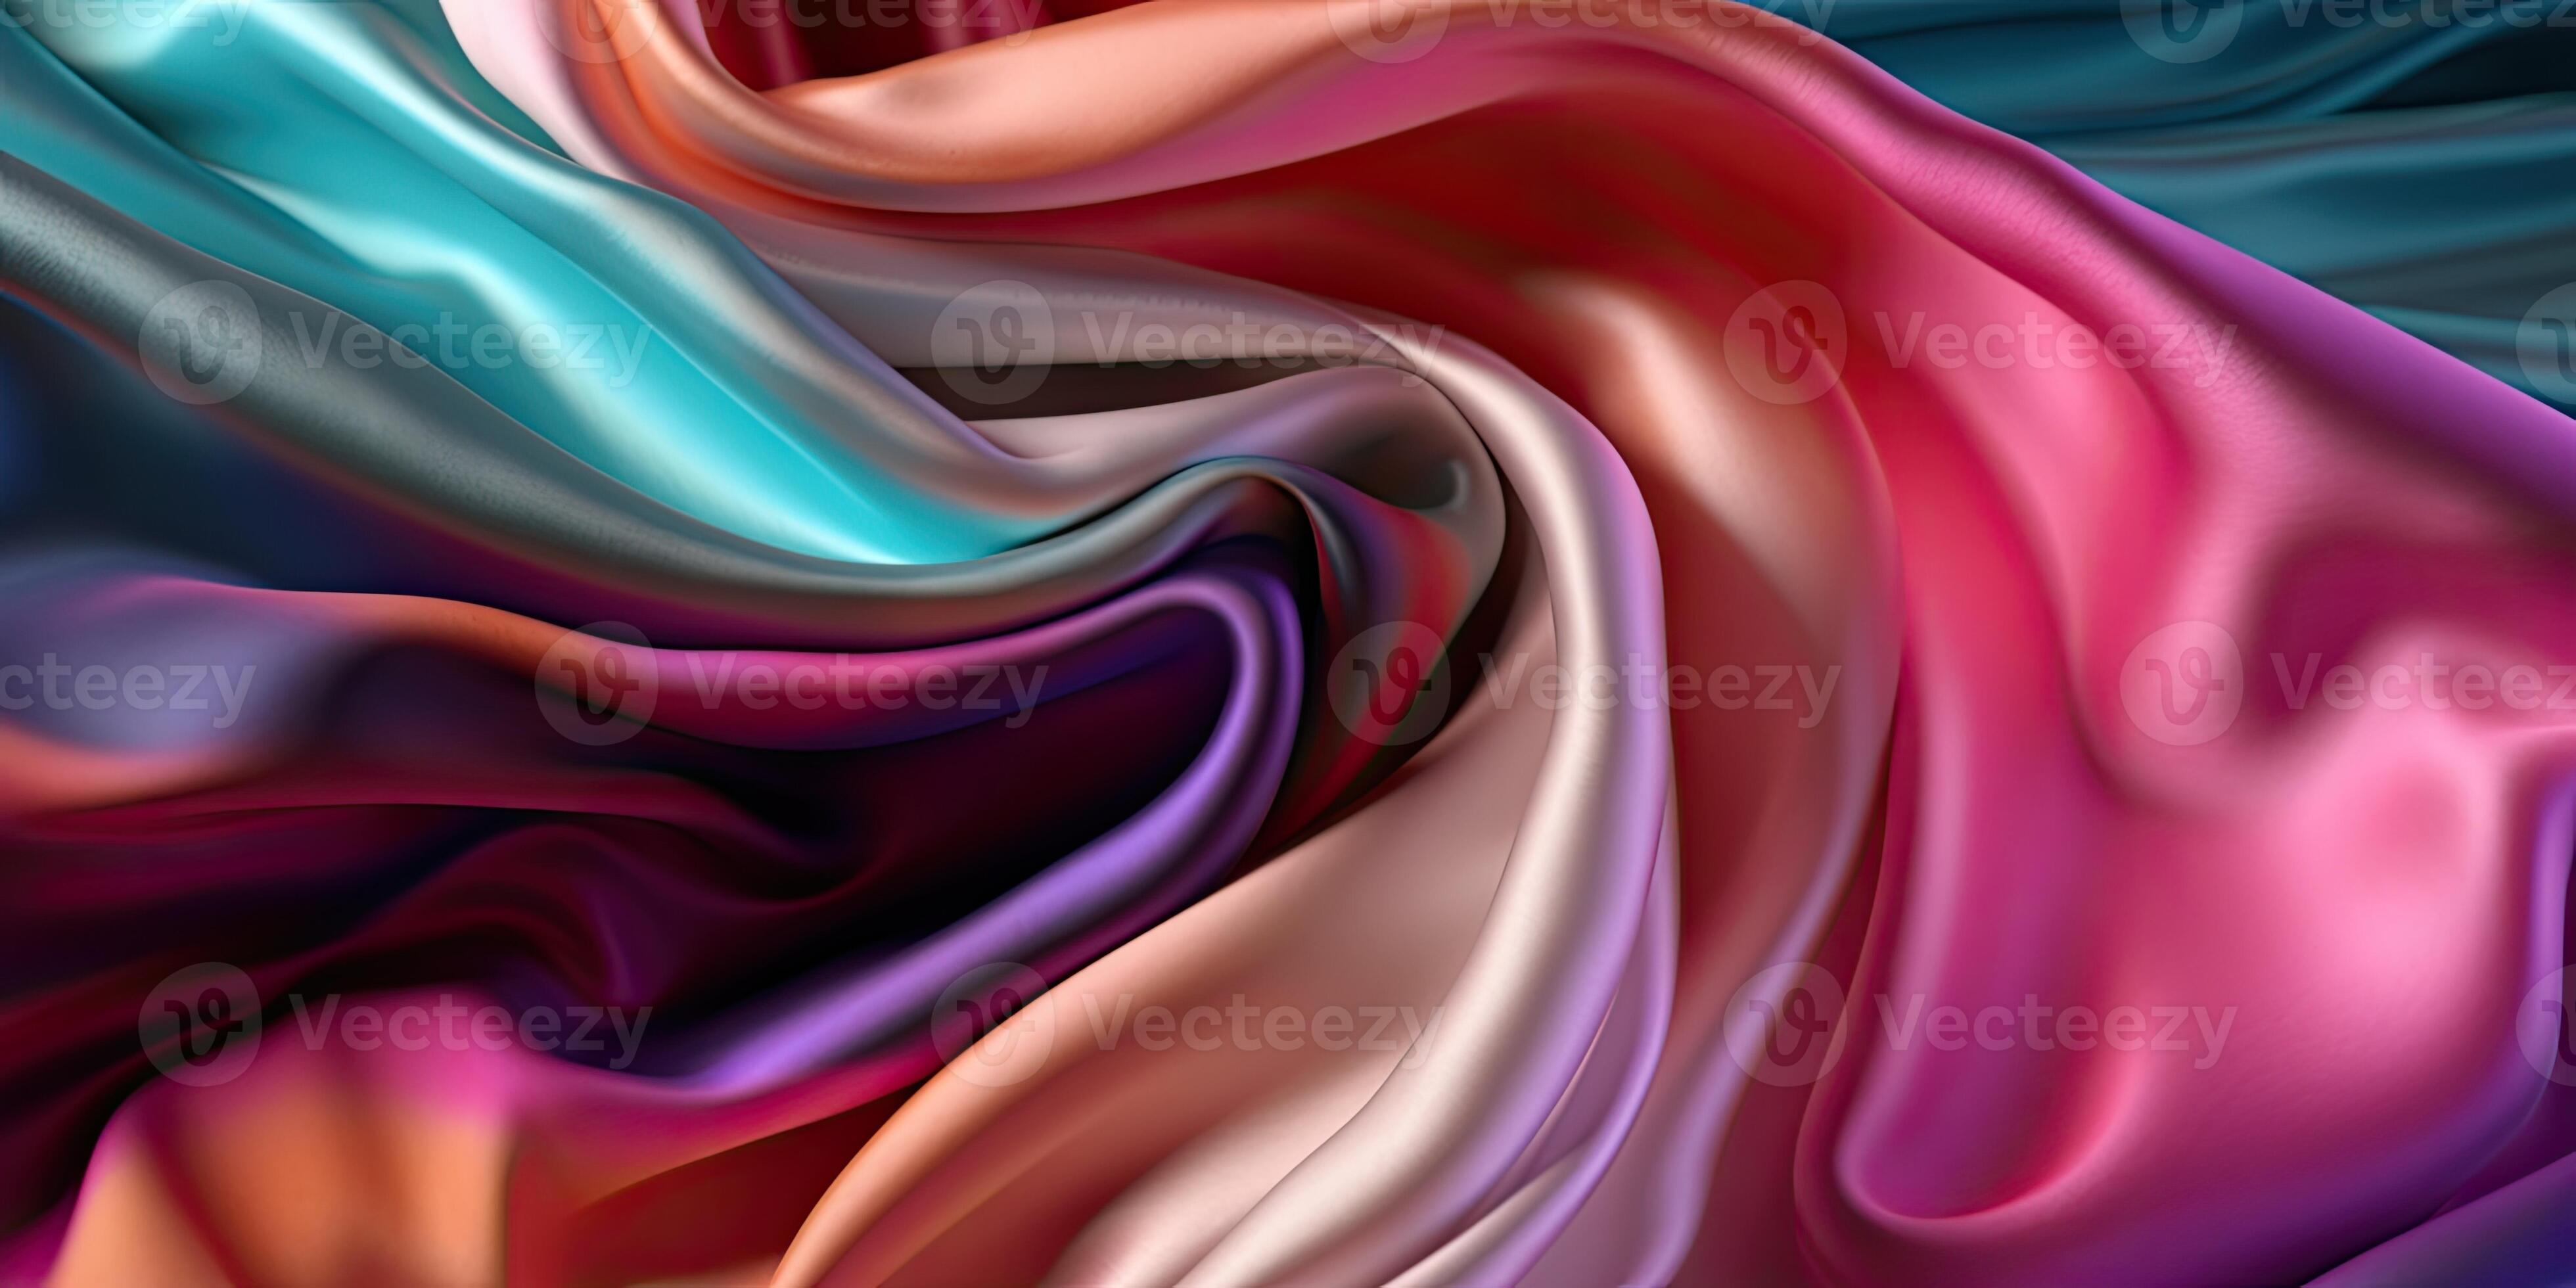 https://static.vecteezy.com/system/resources/previews/022/160/313/large_2x/luxury-silk-fabric-wallpaper-with-wrinkles-and-folds-digital-iridescent-and-wavy-material-background-liquid-foil-gradient-image-photo.jpg